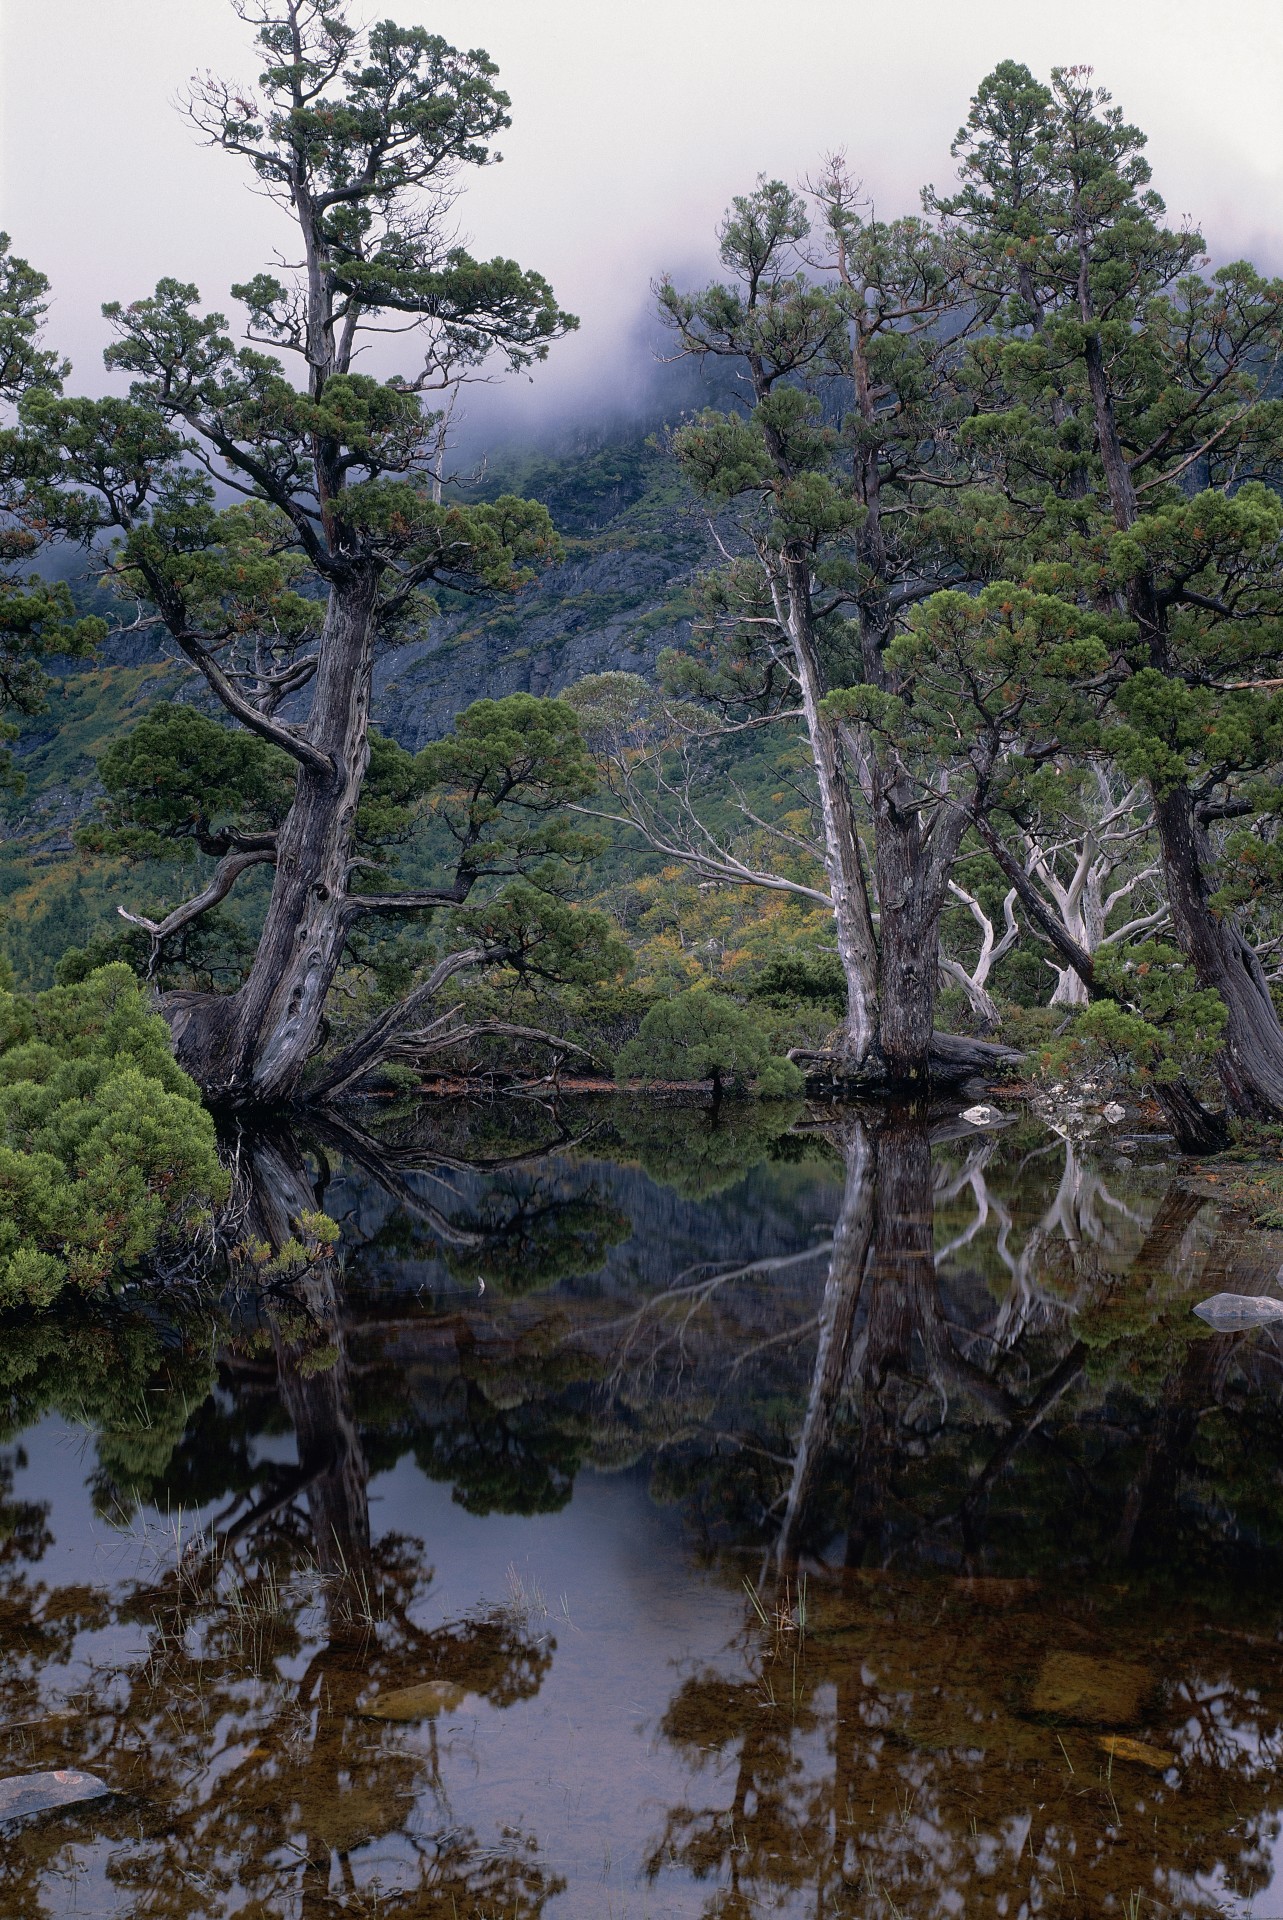 Pine trees reflected in a pool of water